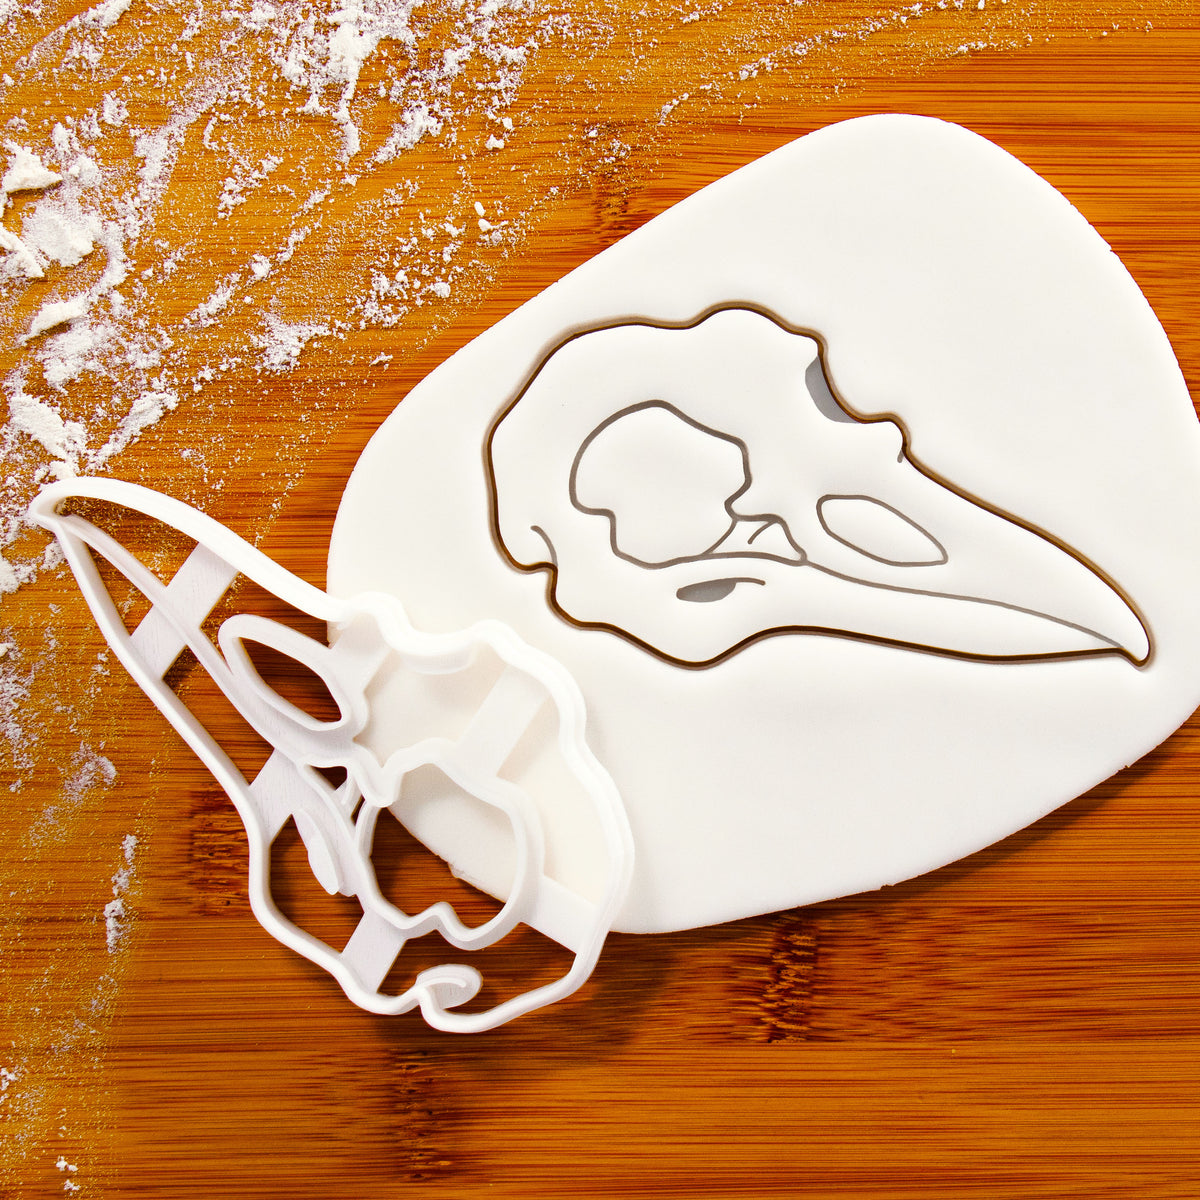 Raven Skull Perspective View Cookie Cutter